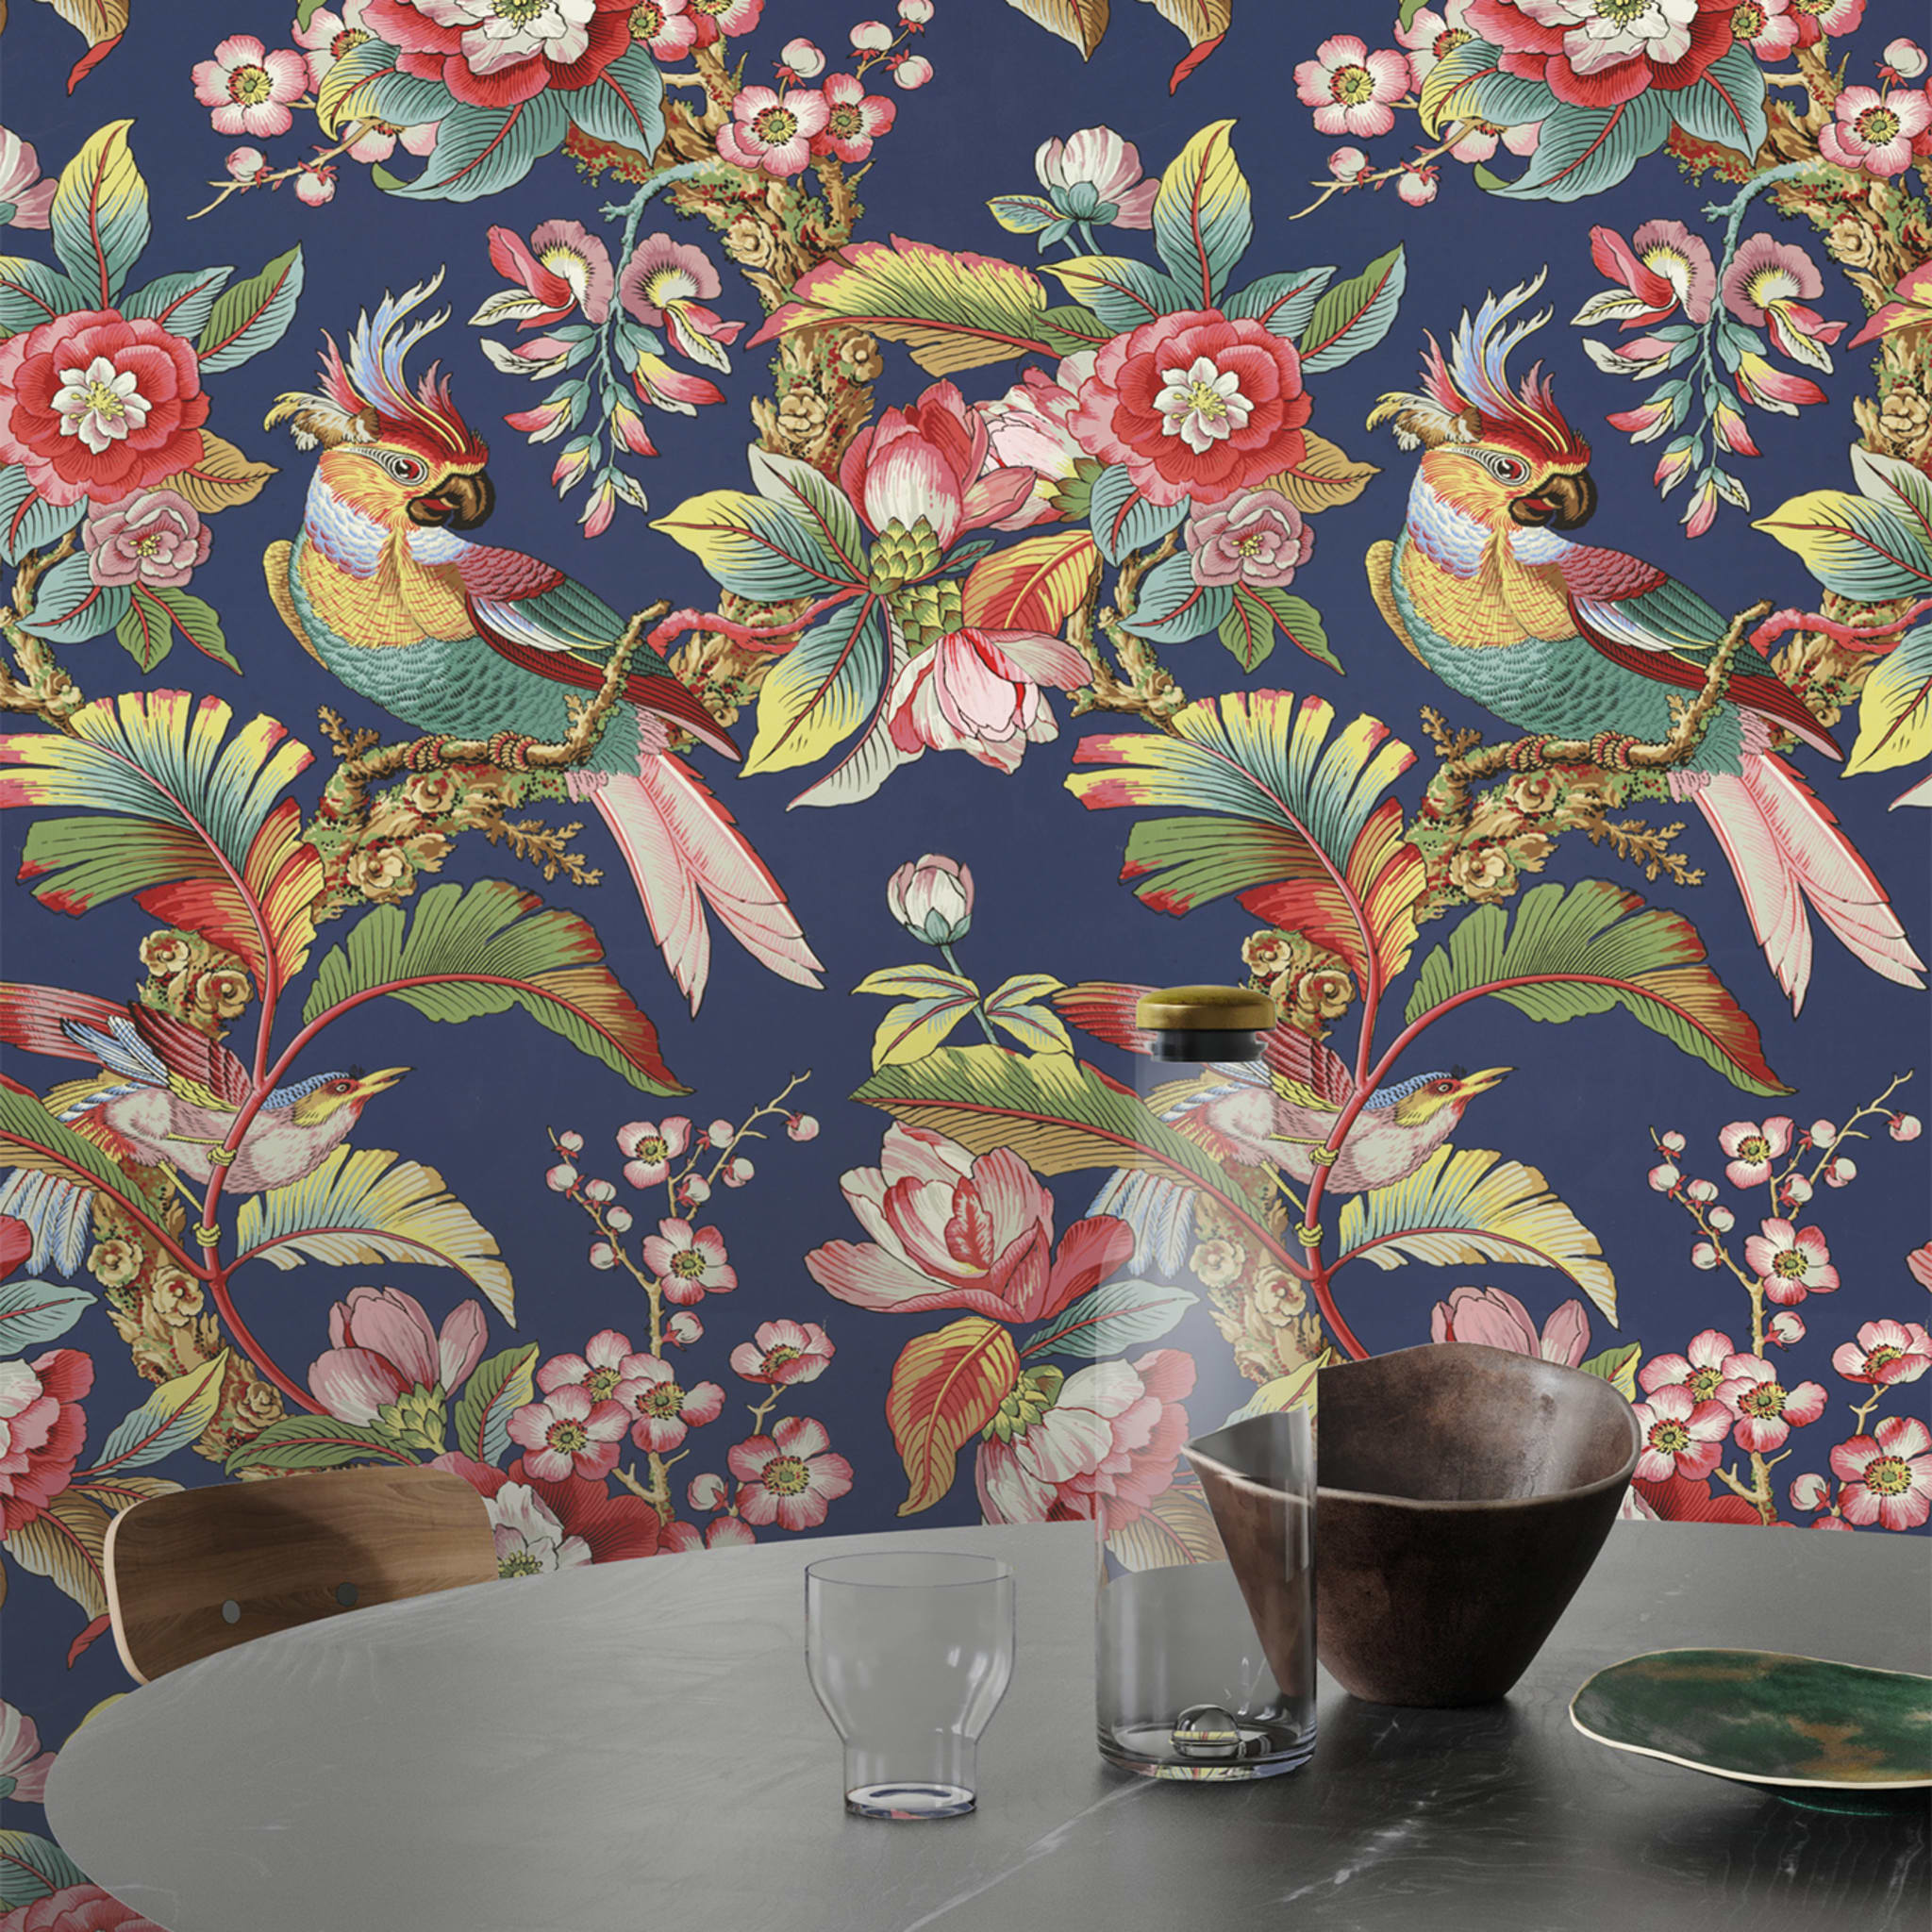 Vintage Asian Chinoiserie Wallpaper - Alternative view 3